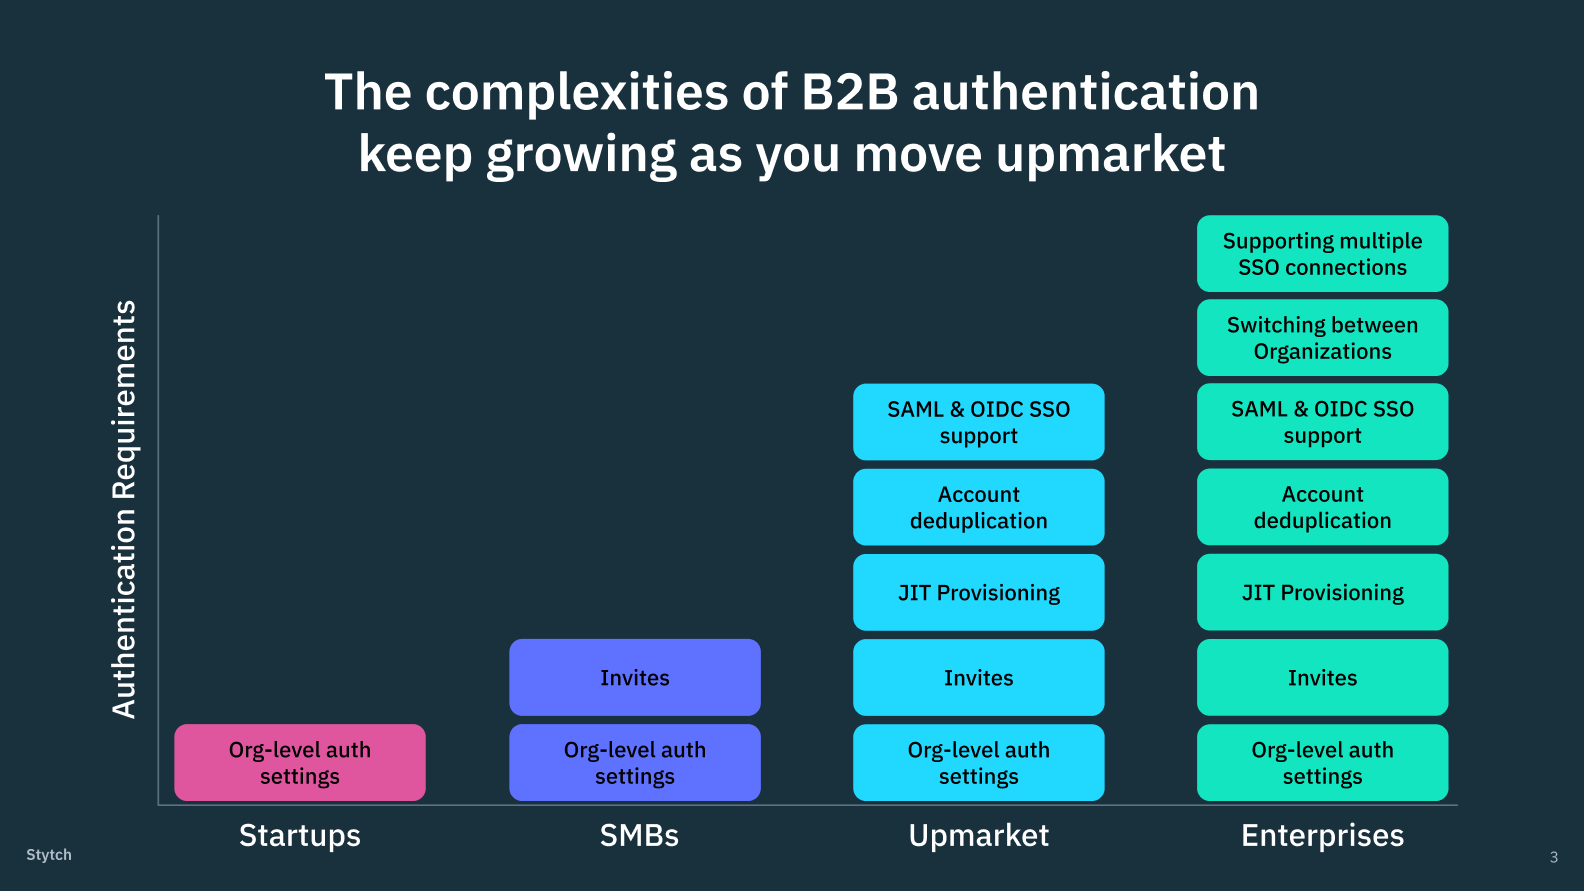 The title "The complexities of B2B authentication keep growing as you move upmarket," hovering above a bar graph that shows the increasing requirements for B2B auth at various stages of company growth: Startups, SMBs, Upmarket, and Enterprise